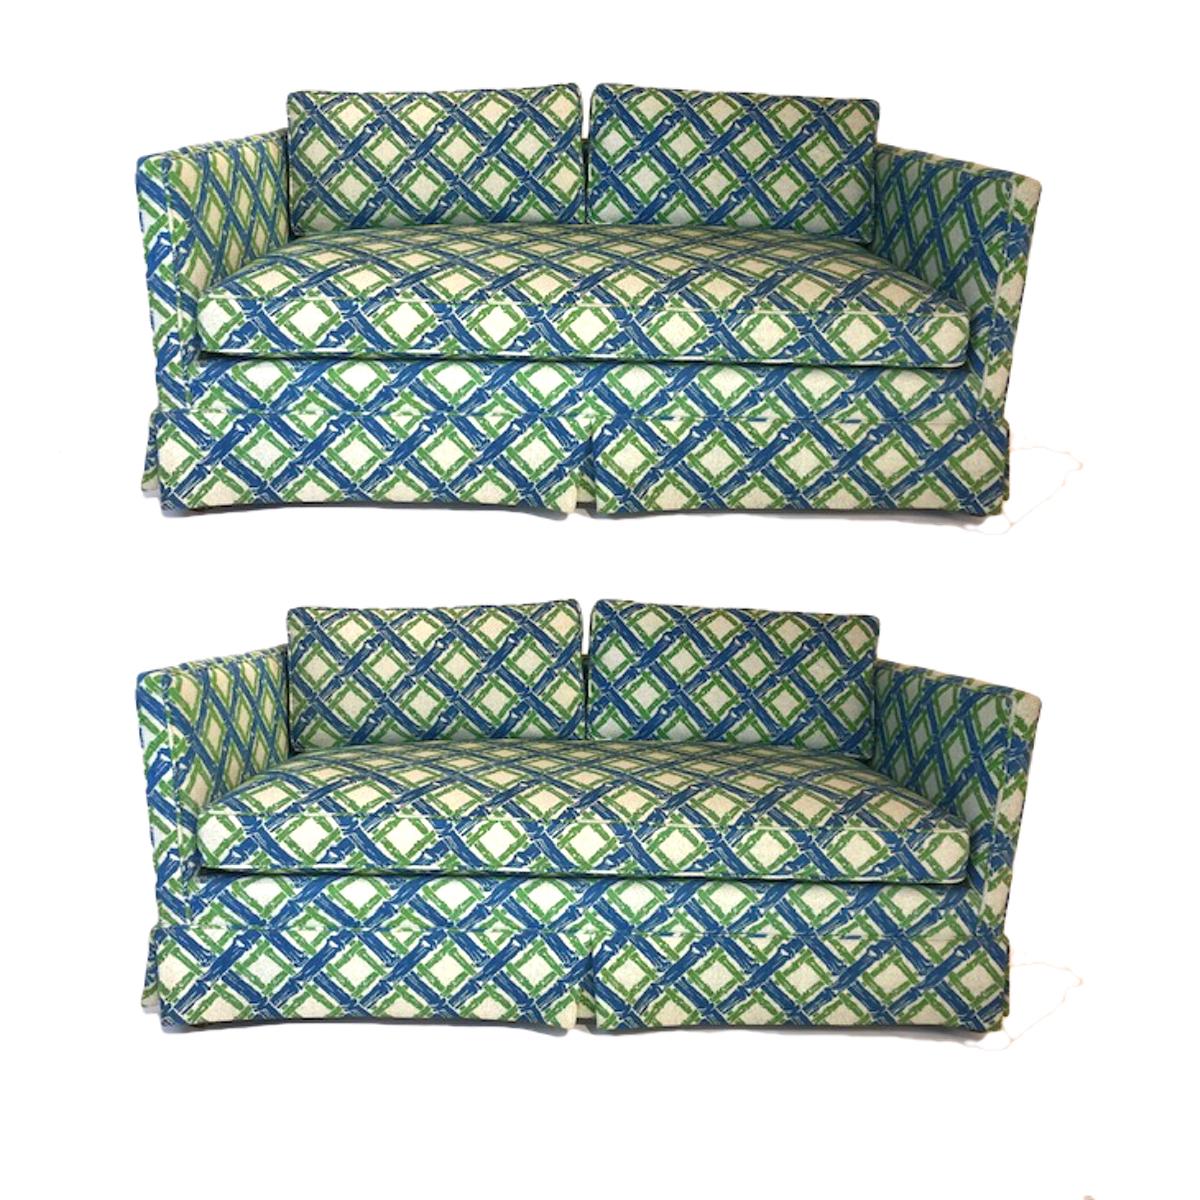 Stunning pair of 1950s Parson or Tuxedo style settees with luxurious heavy textured upholstery in a stunning lattice bamboo geometric pattern in a vibrant blue and green. These pieces are in very good condition. Under the skirt is square dark wood